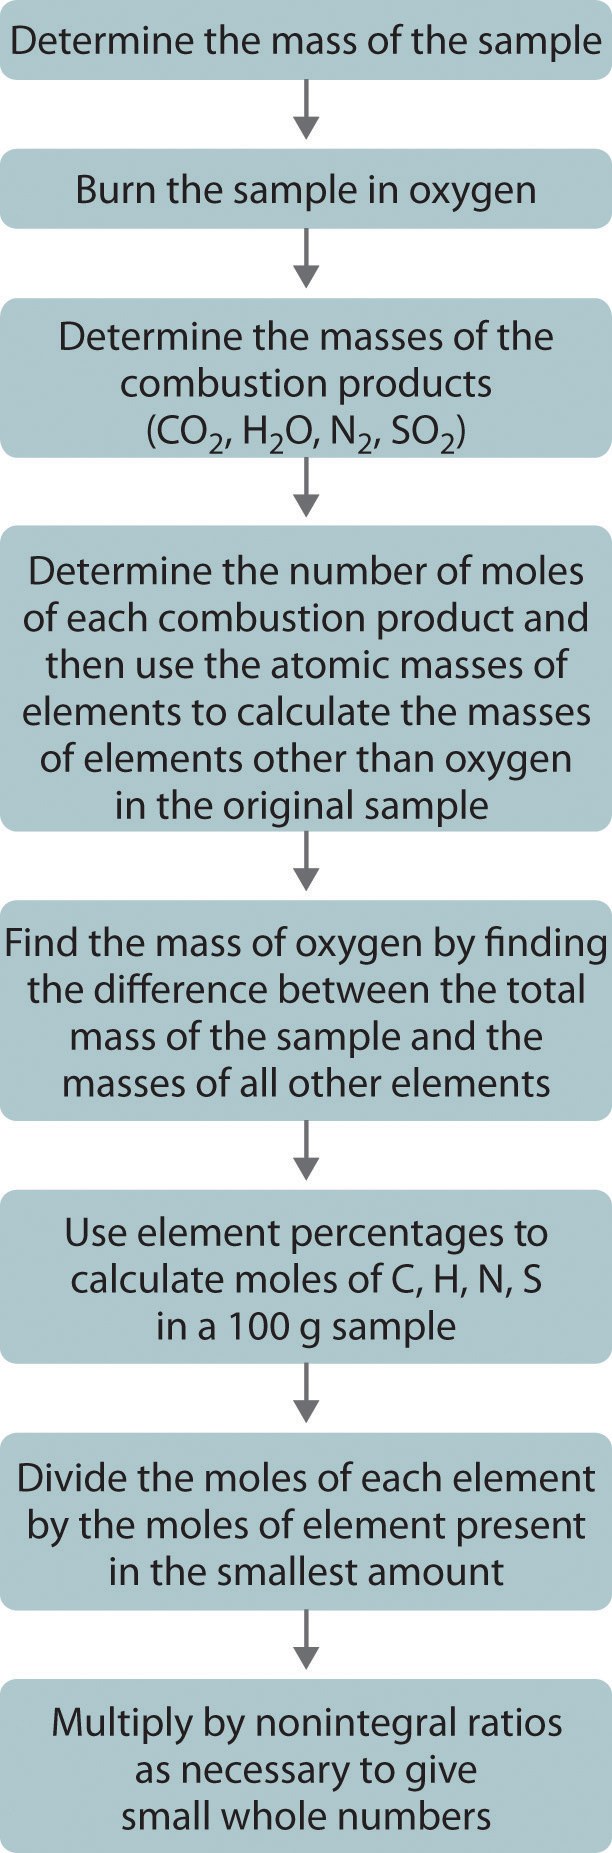 Flowchart of steps to determine the empirical formula of a substance via combustion analysis. Determine the mass of the sample. Burn the sample in oxygen. Determine the masses of the combustion products. Determine the number of moles of each combustion product and then use the atomic masses of elements to calculate the masses of elements other than oxygen in the original sample. Find the mass of oxygen by finding the difference between the total mass of the sample and the masses of all other elements. Use element percentages to calculate moles of C, H, N, S in a 100g sample. Divide the moles of each element by the moles of element present in the smallest amount. Multiply by nonintegral ratios as necessary to give small while numbers.